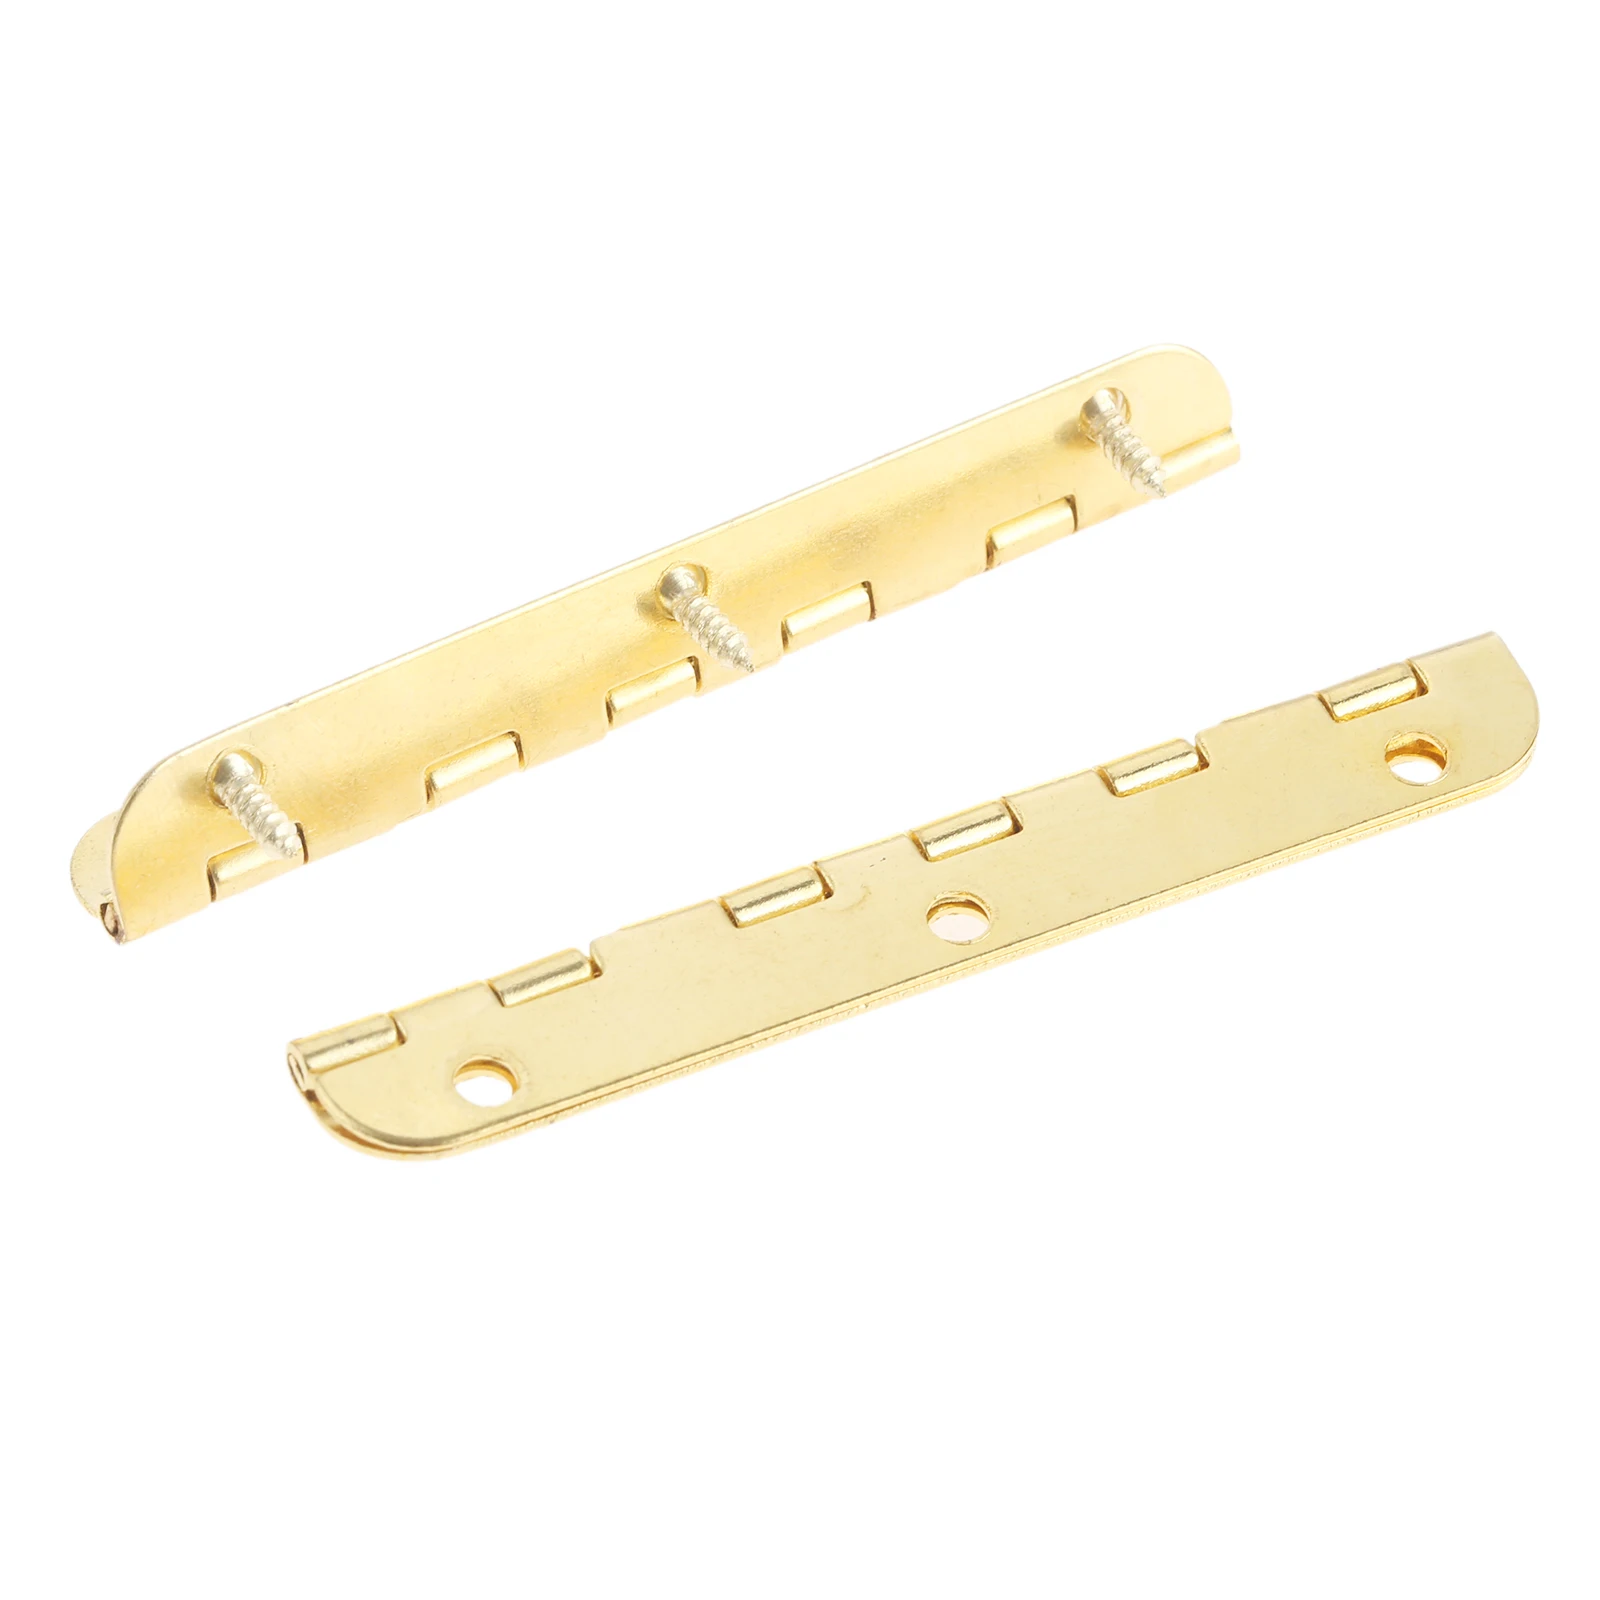 4Pcs 65*15mm 90°  DegreeCabinet Door Luggage Hinges 6 Holes Jewelry Wood Boxes Hinge Furniture W/Screws Gold/Silver/Bronze